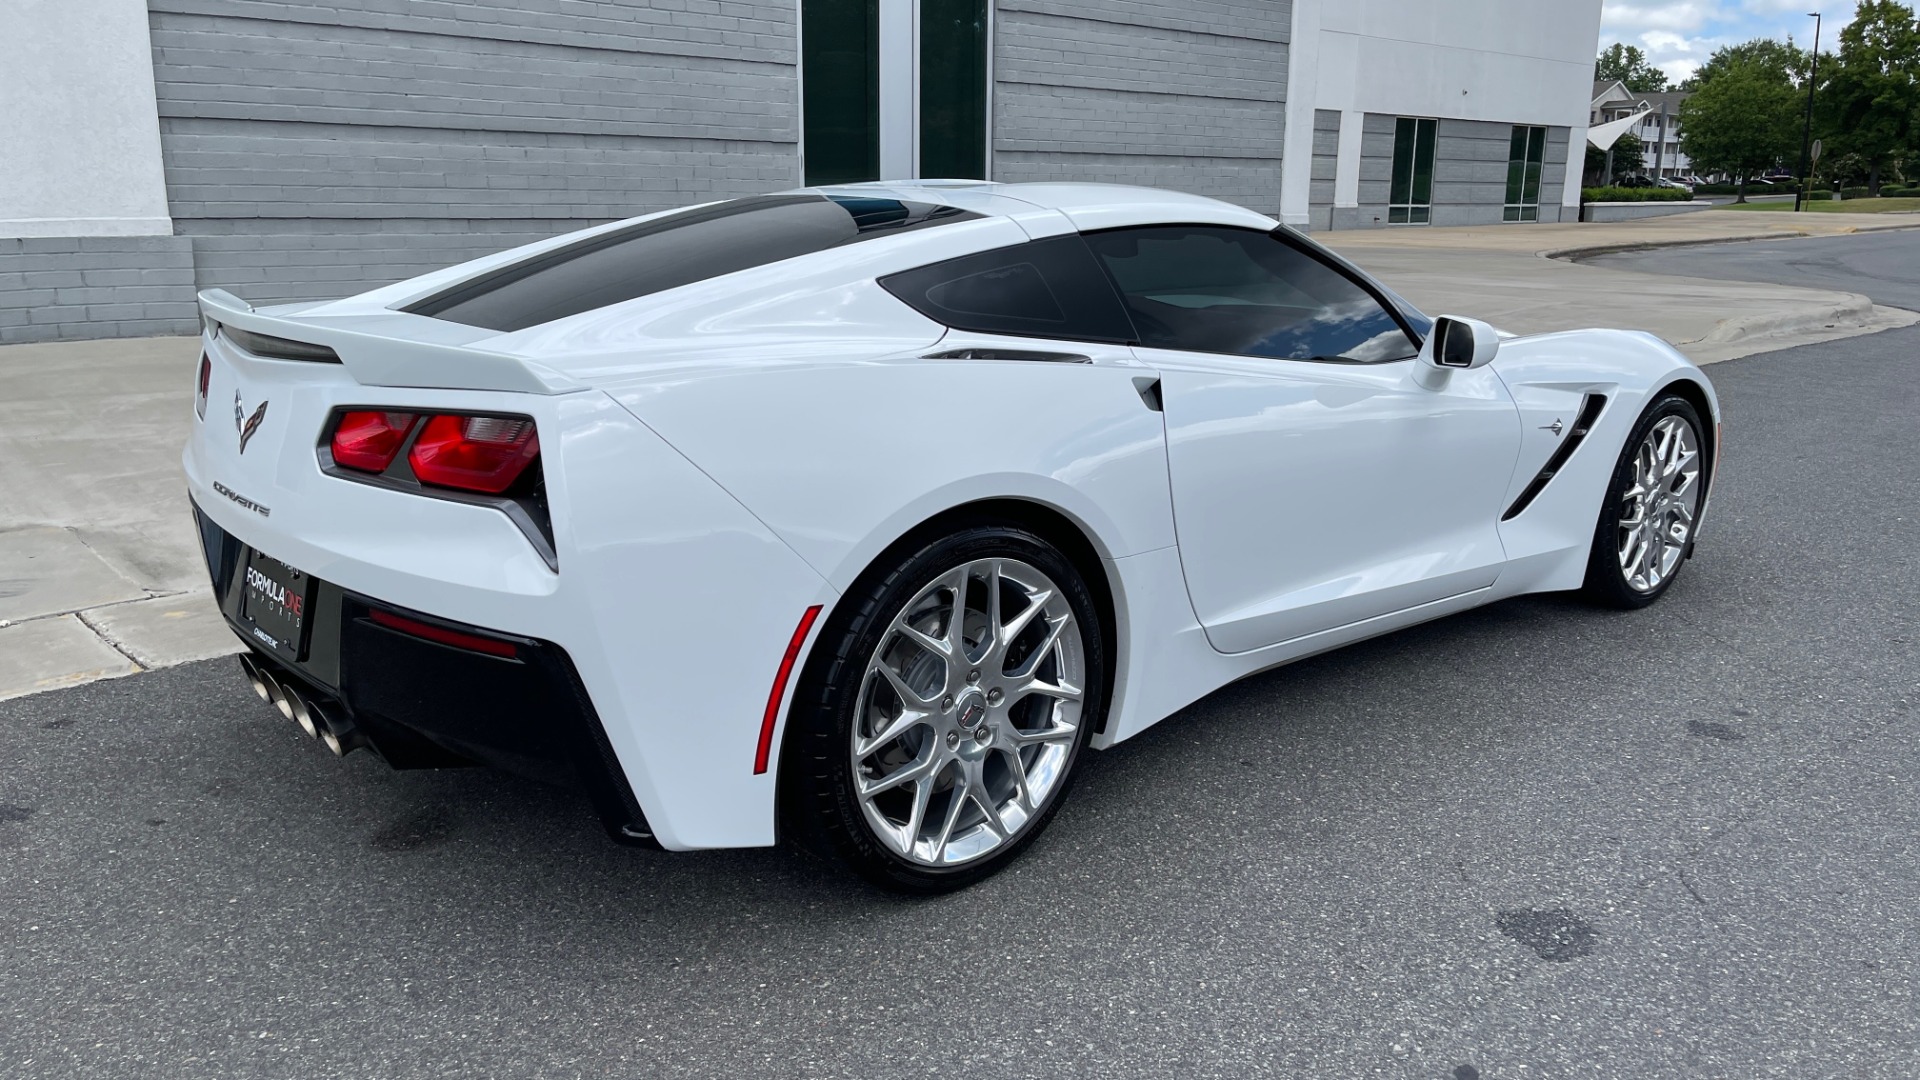 Used 2016 Chevrolet CORVETTE C7 STINGRAY COUPE Z51 3LT / NAV / PERF TRACTION MGMT / REARVIEW for sale Sold at Formula Imports in Charlotte NC 28227 3